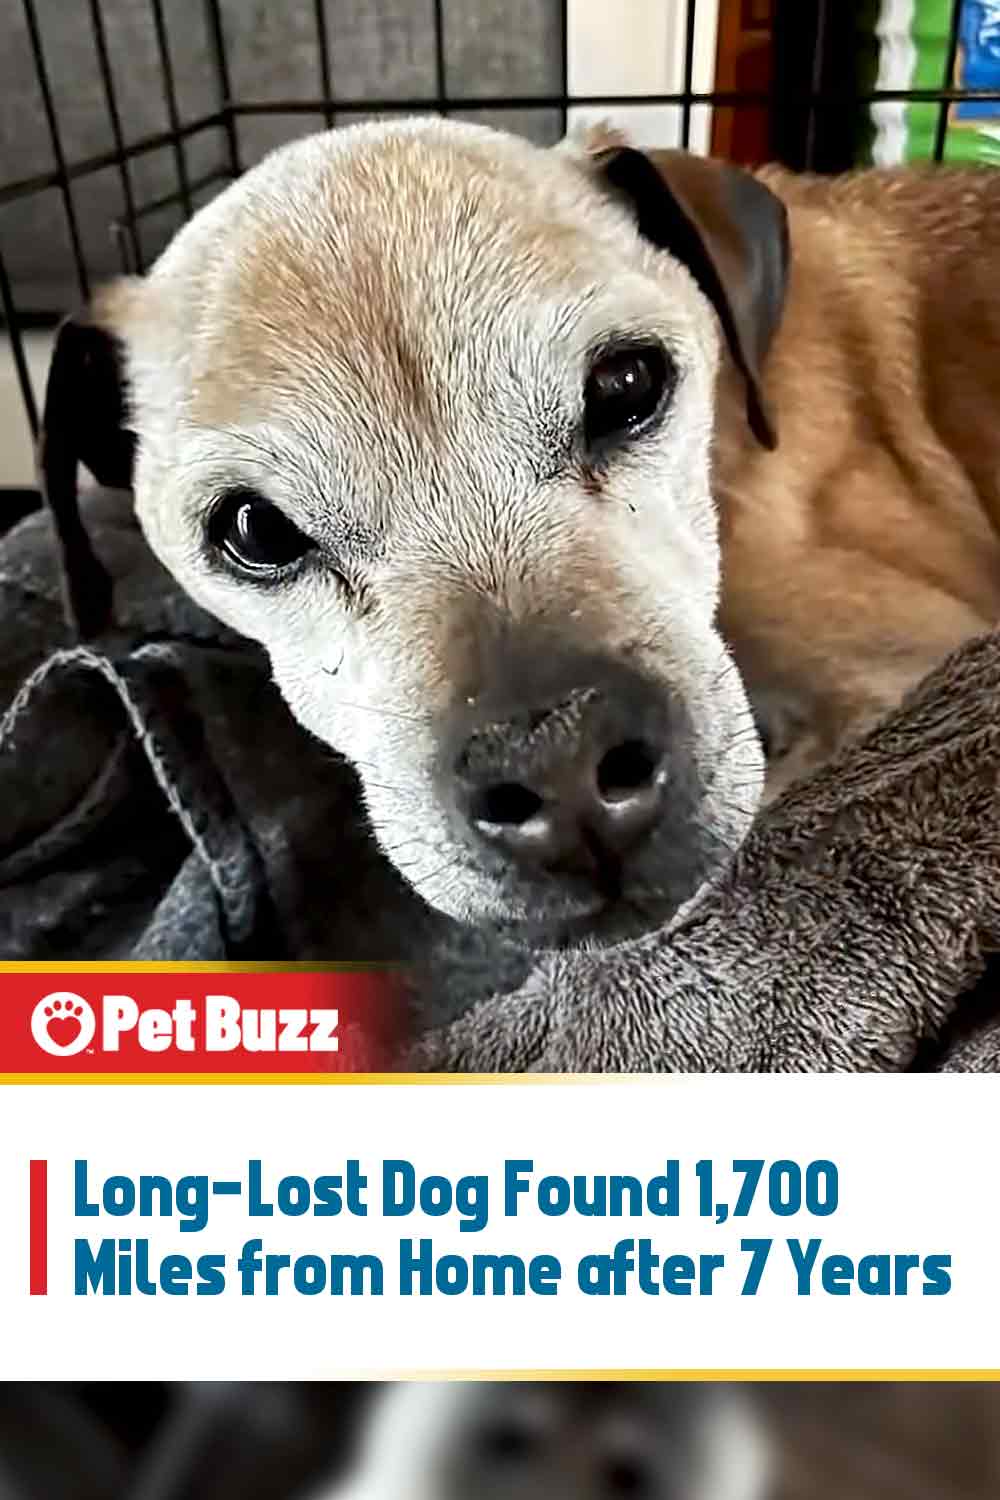 Long-Lost Dog Found 1,700 Miles from Home after 7 Years